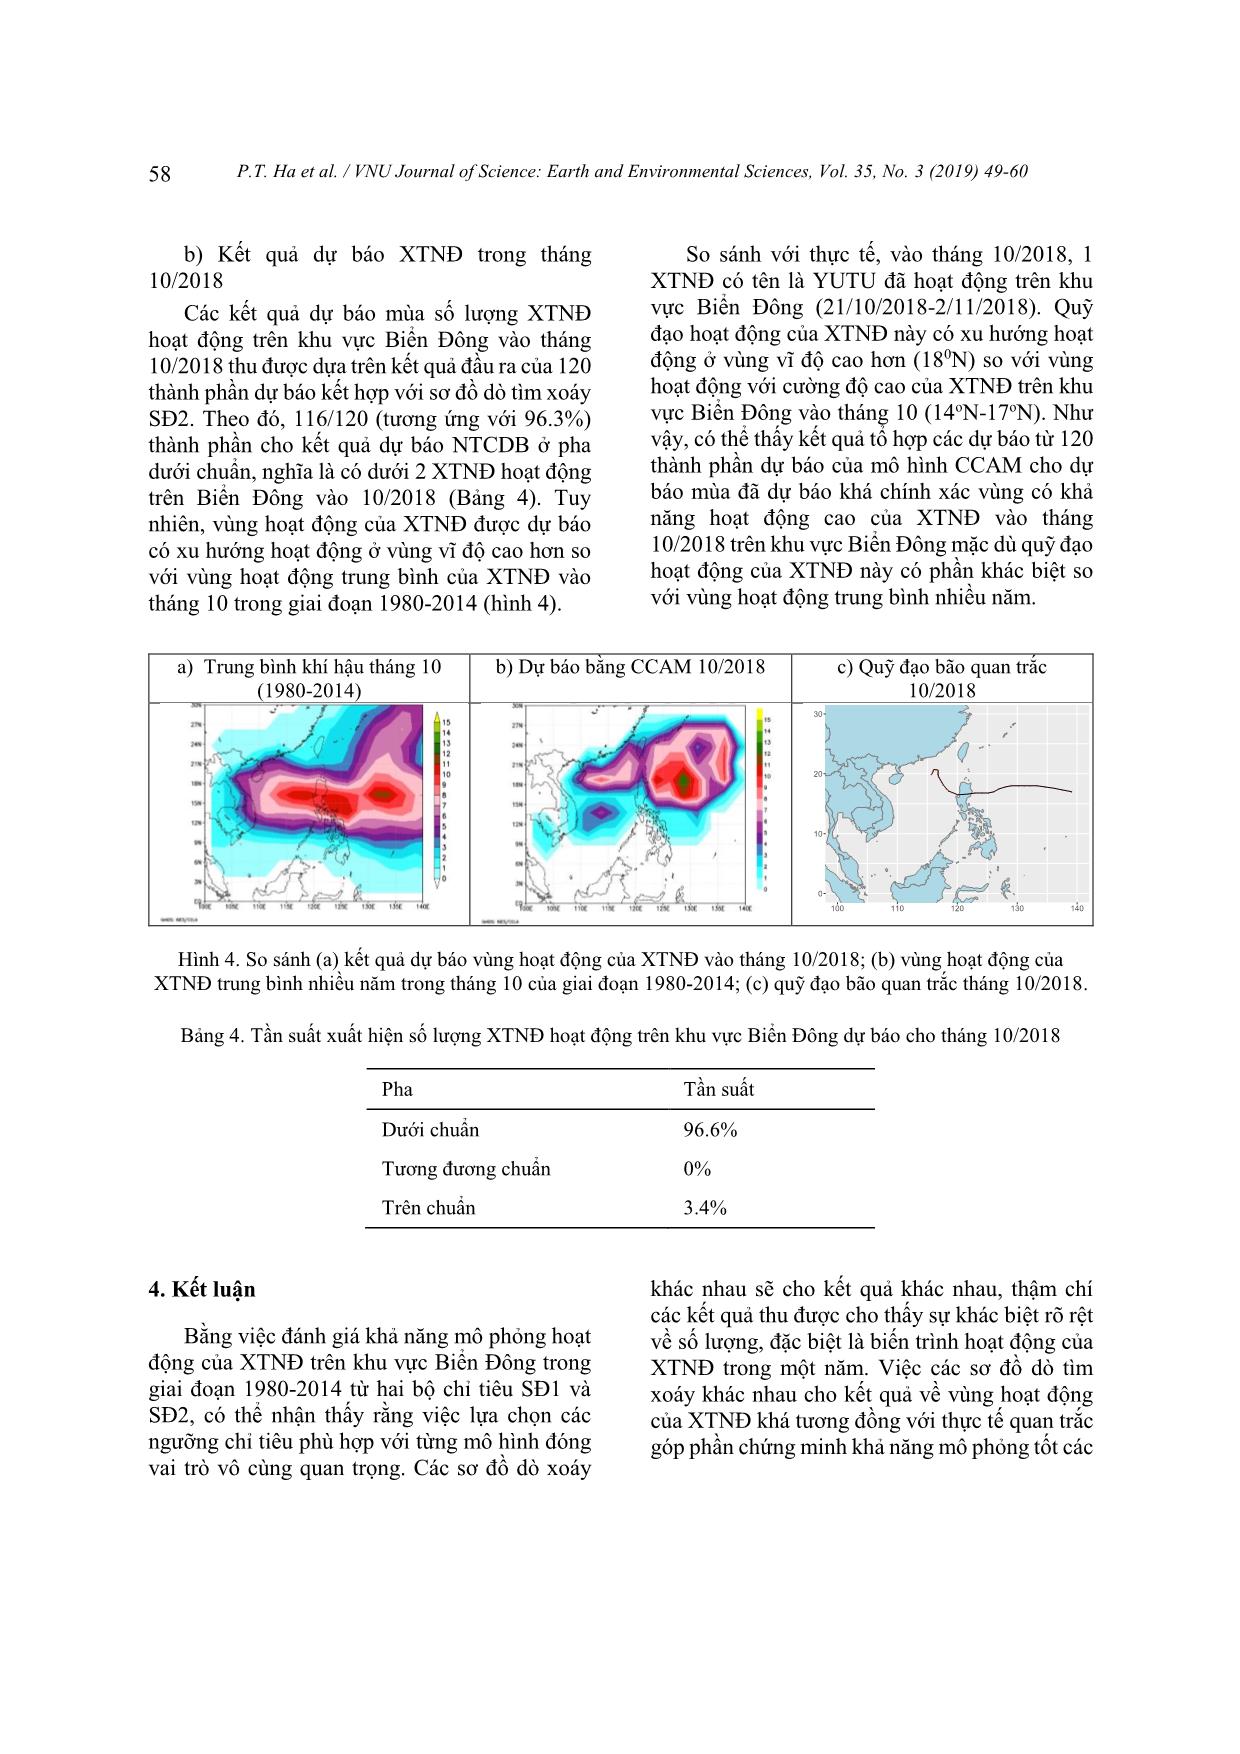 Implementation of Tropical Cyclone Detection Scheme to CCAM Model for Seasonal Tropical Cyclone Prediction over the Vietnam East Sea trang 10